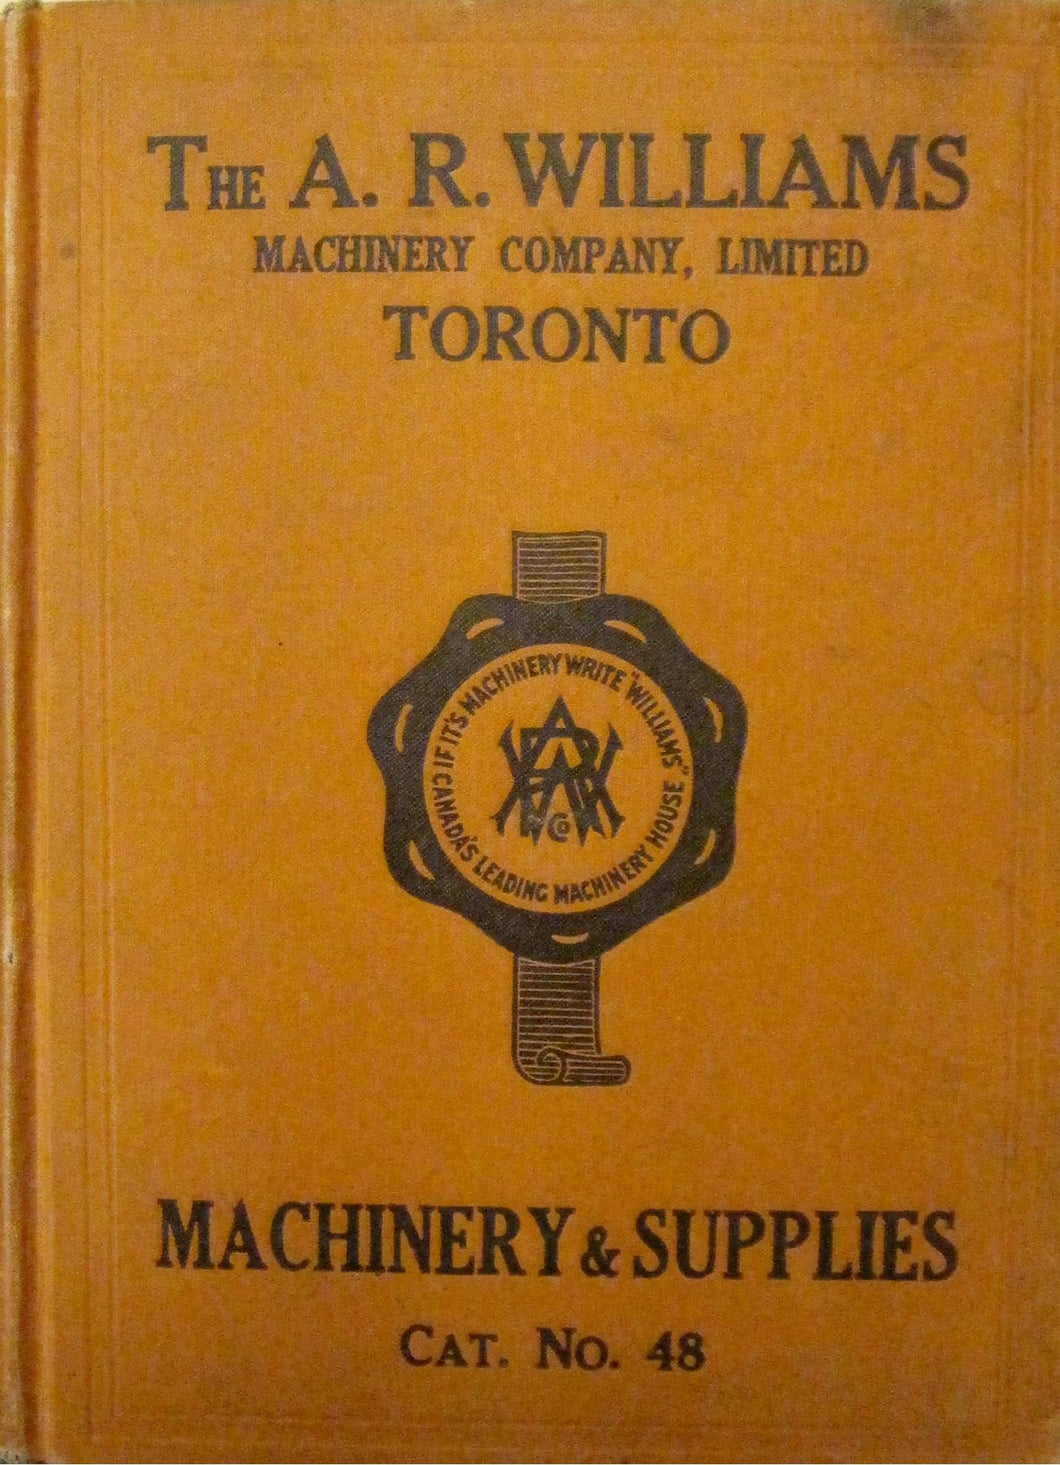 Catalogue 48. The A. R. Williams Machinery Co., Ltd. Machinery and Mill Supplies